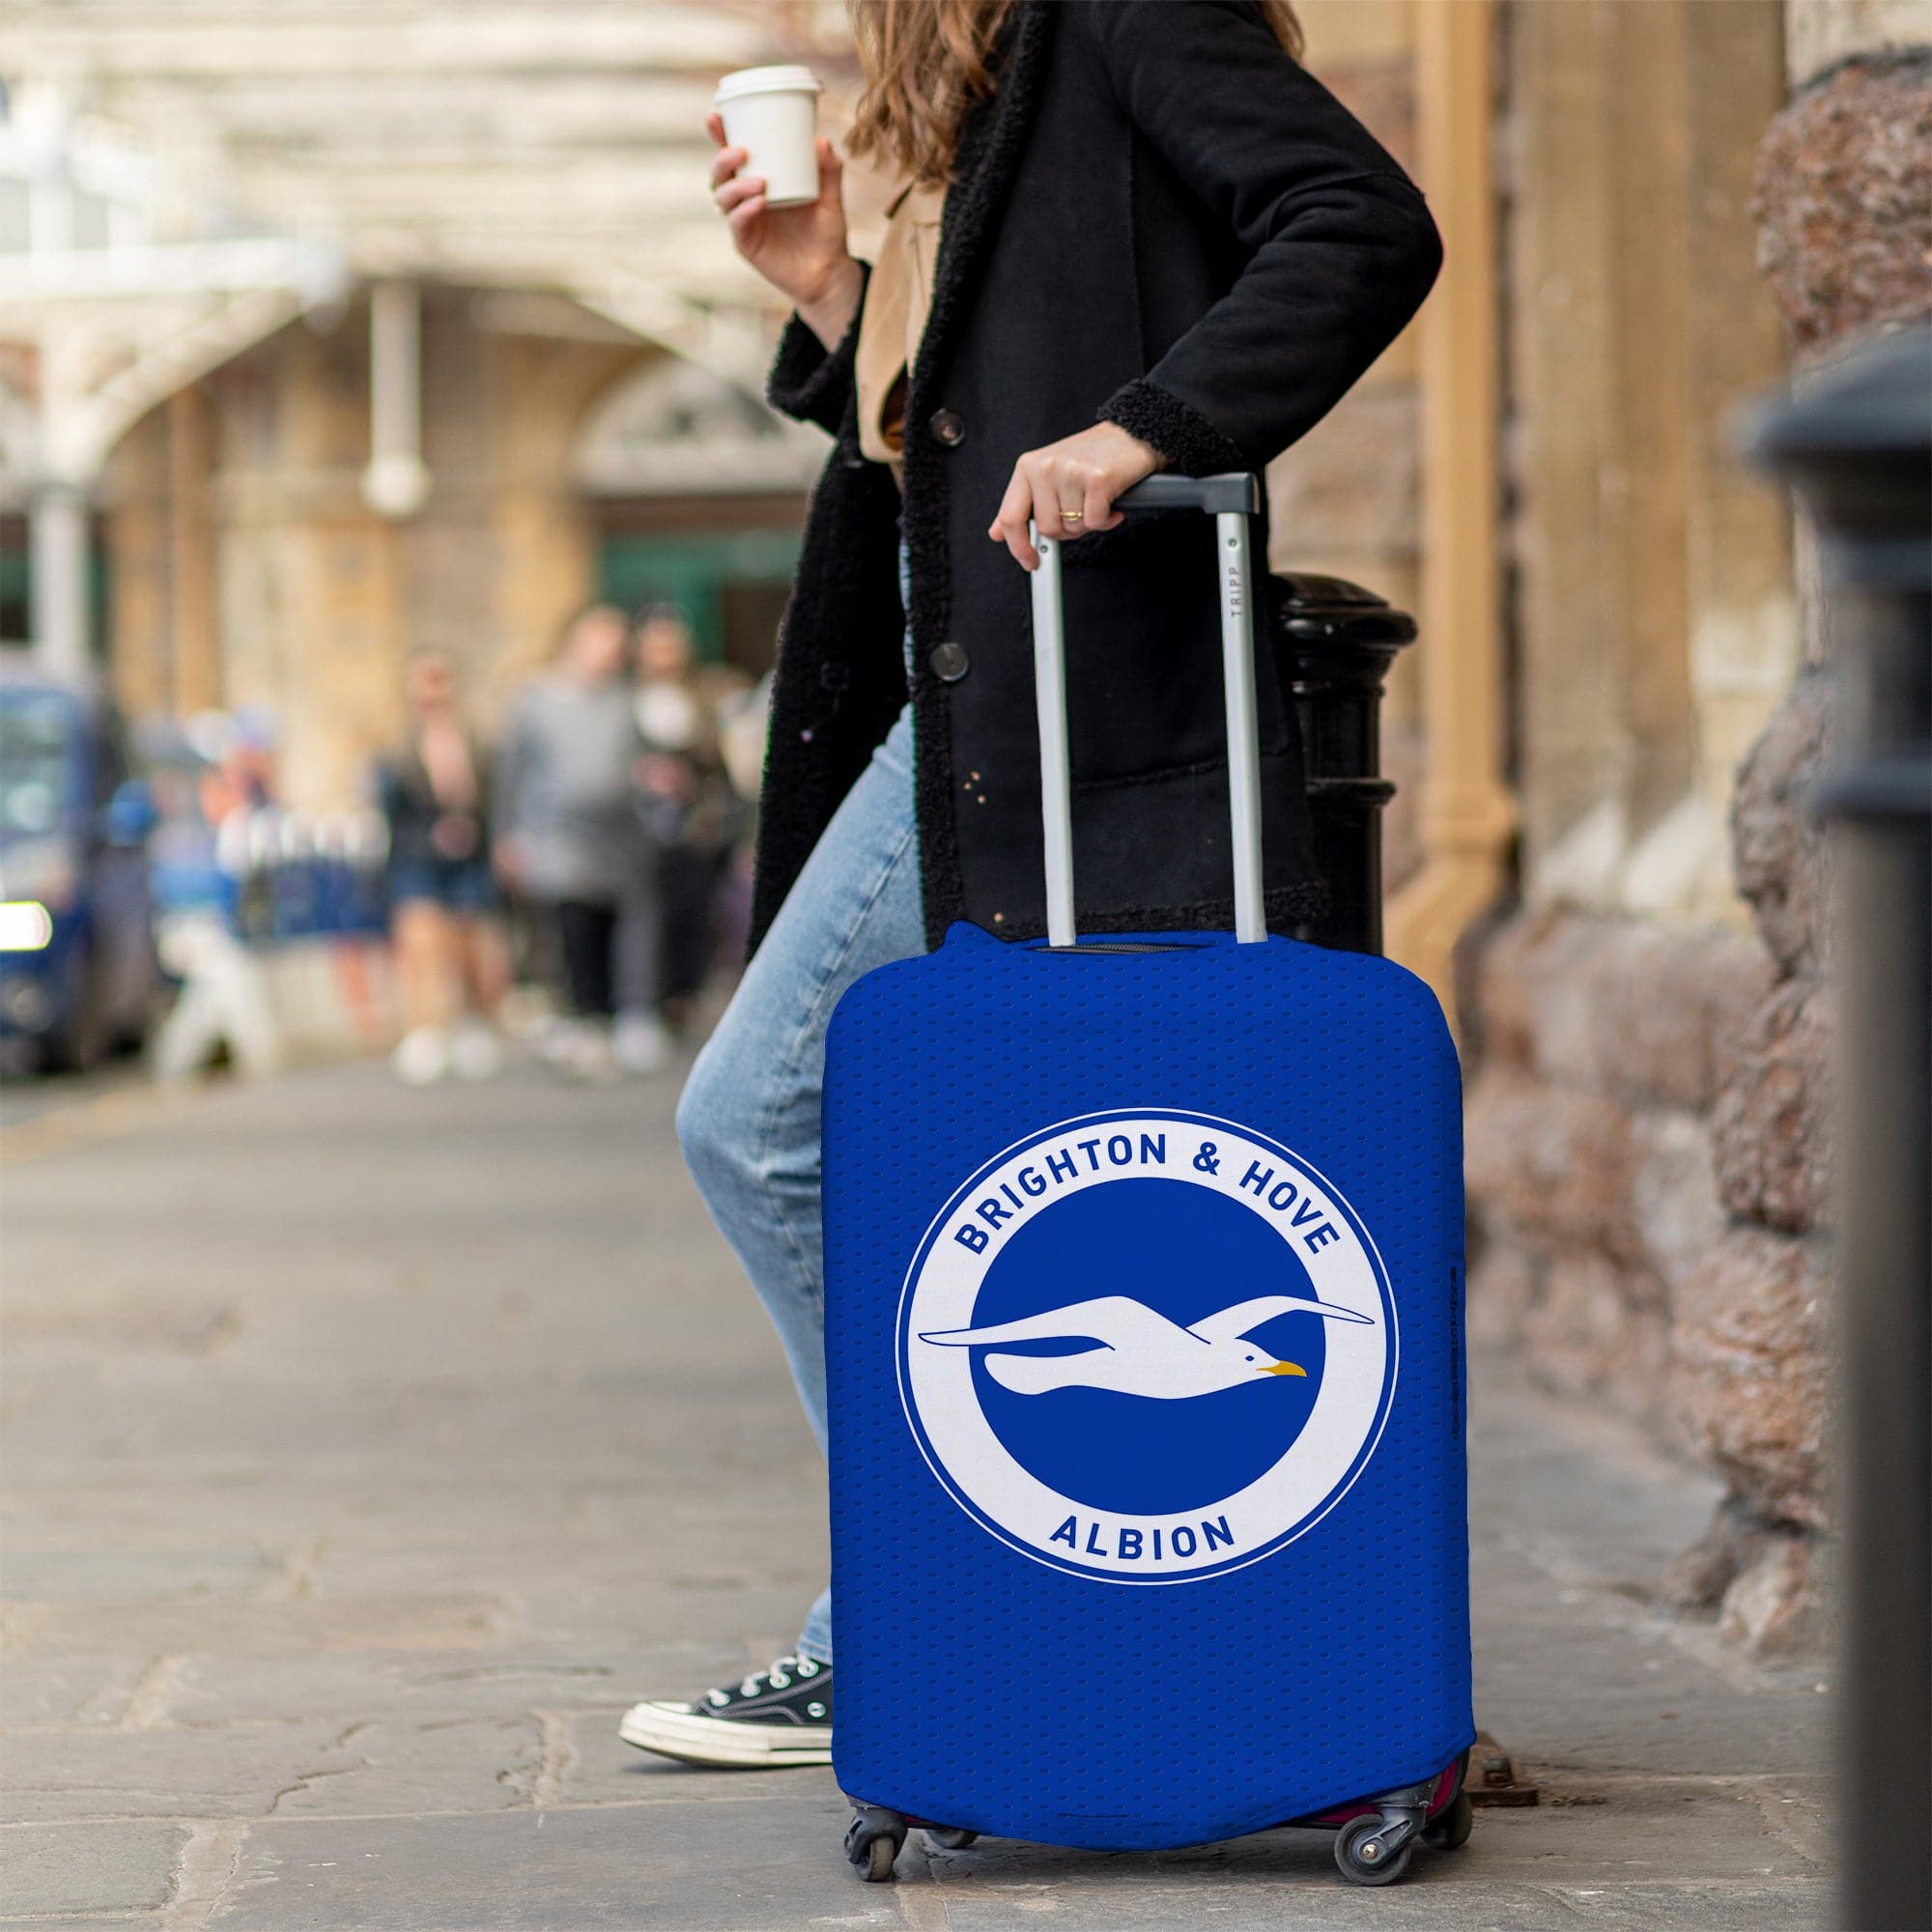 Brighton and Hove FC - Name and Number Caseskin Suitcase Cover - Officially Licenced